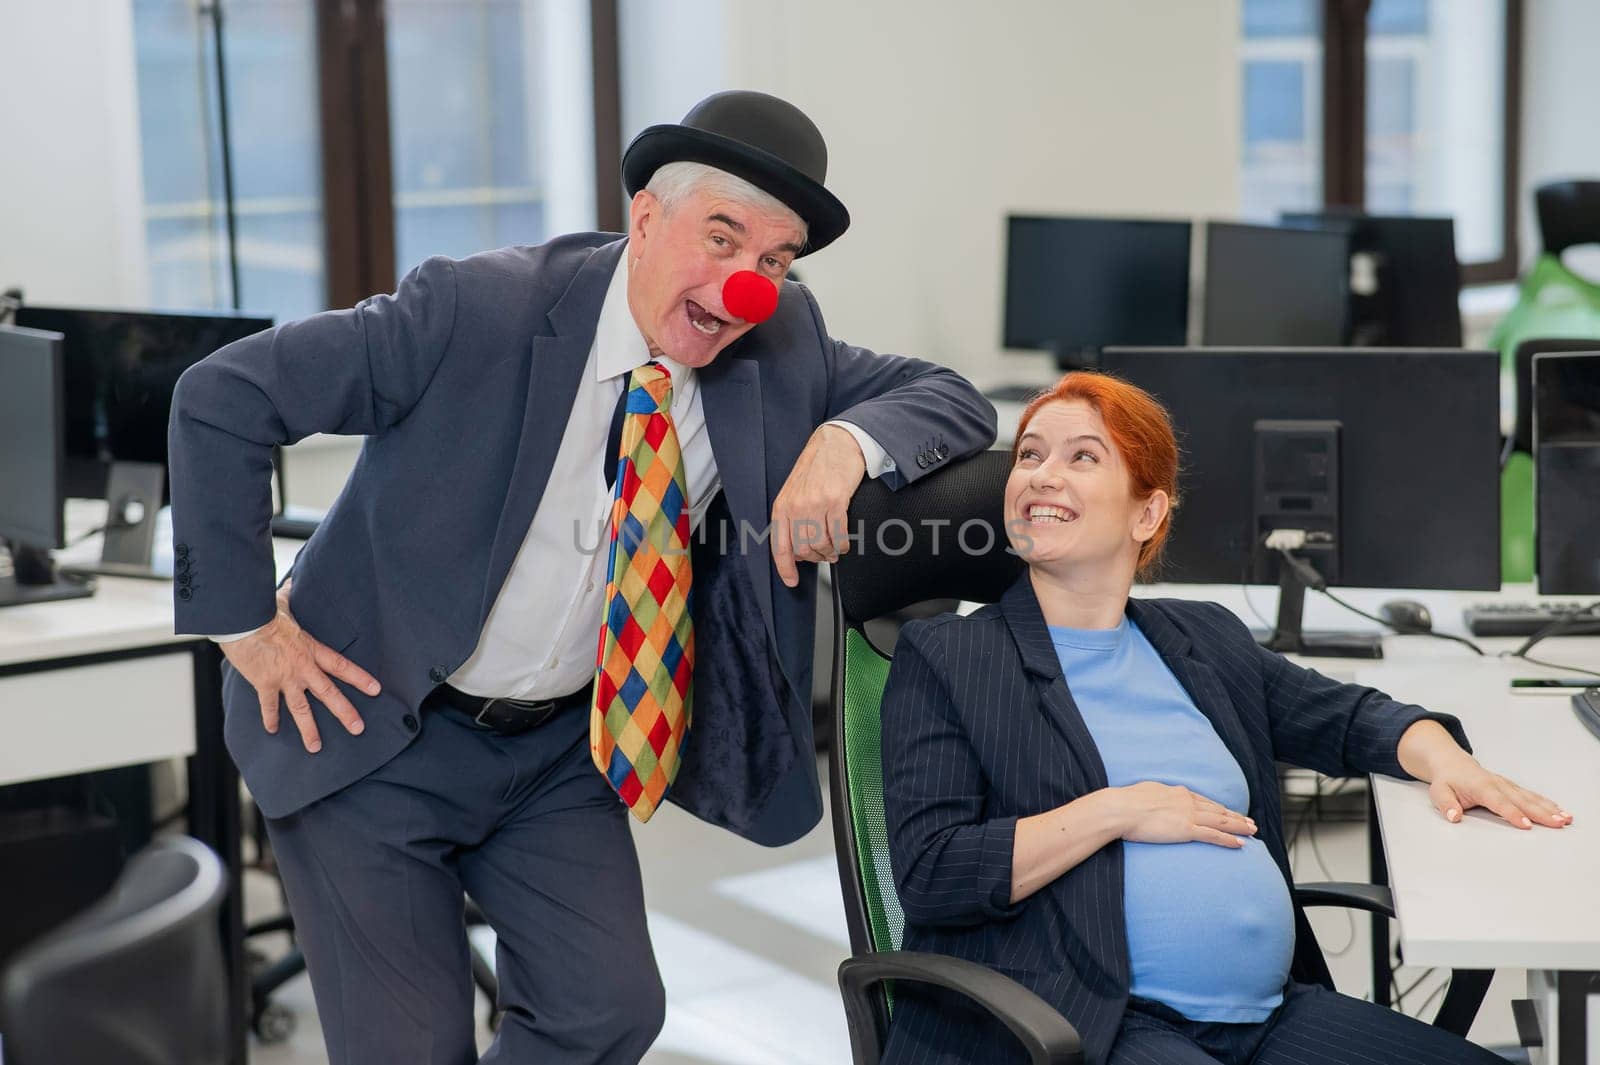 Elderly Caucasian man in clown costume amuses pregnant red-haired woman at work desk in office